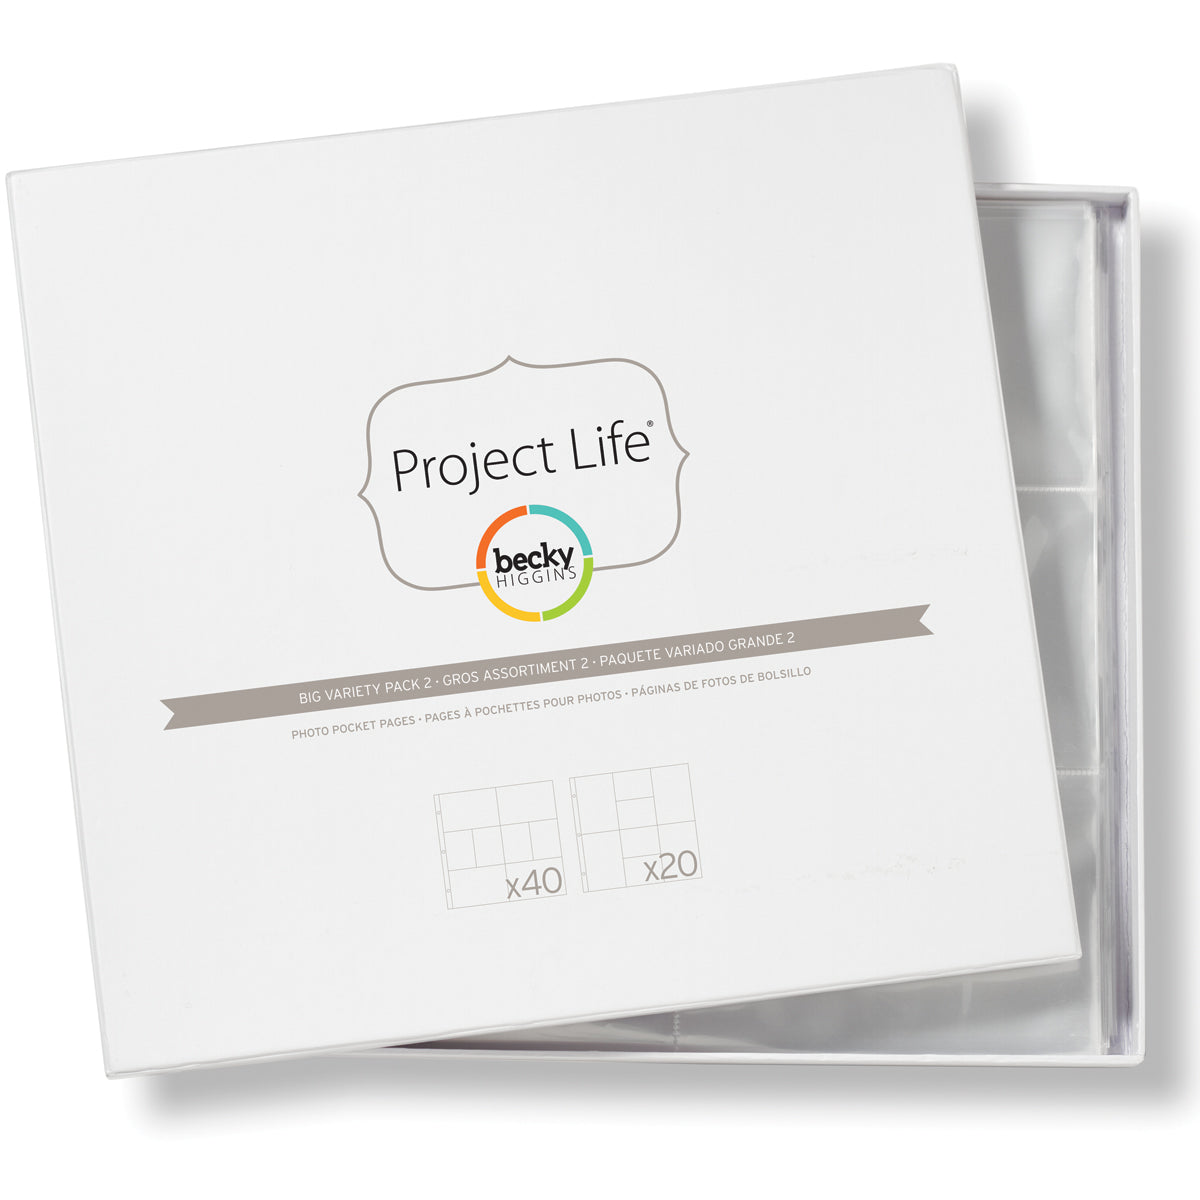 Project Life Photo Pocket Pages 60/Pkg-Big Variety Pack 2